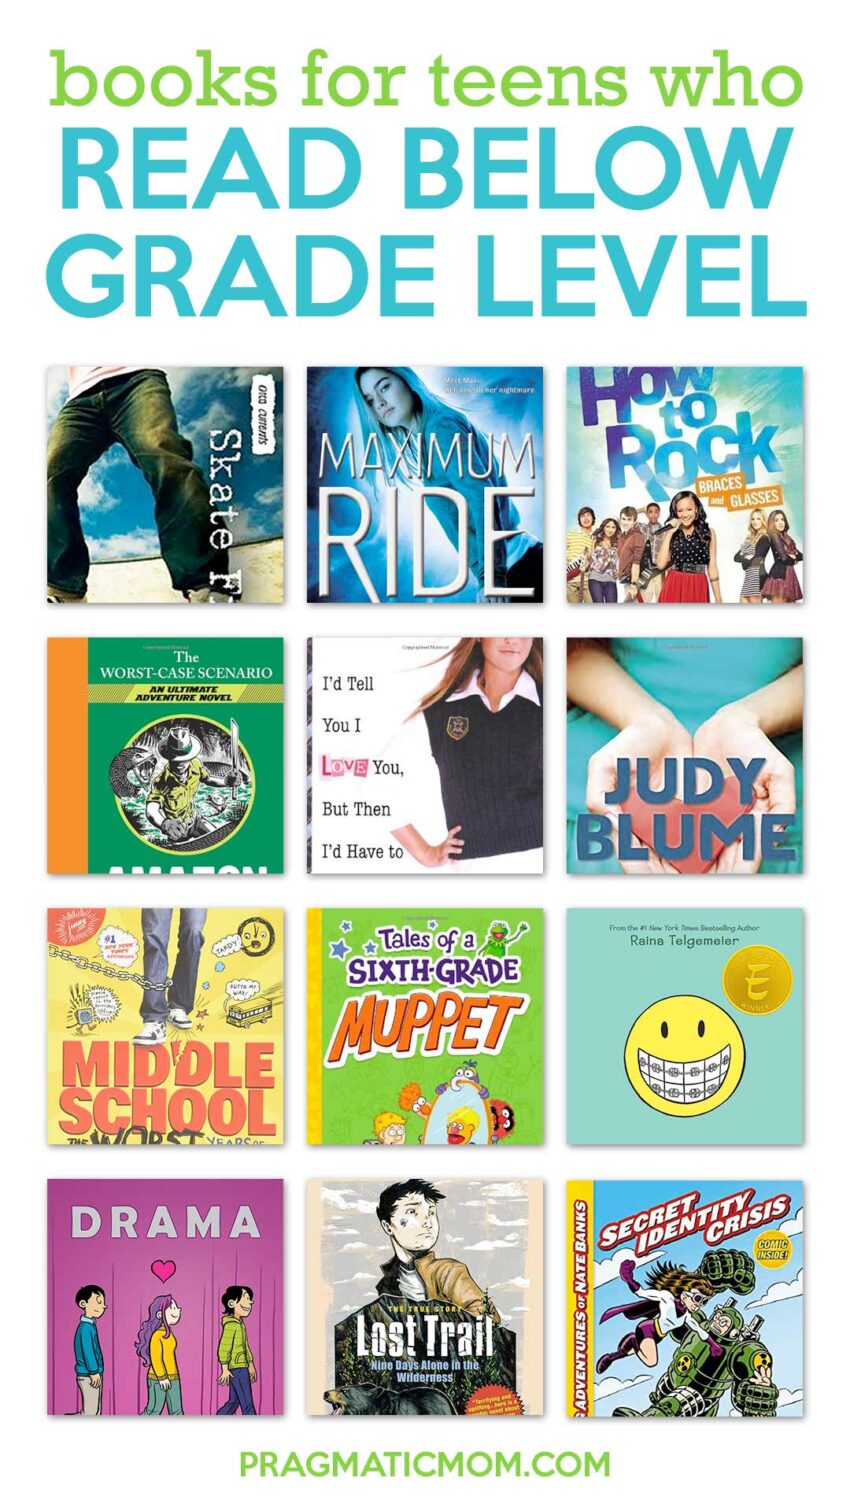 Books for Teens Who Read Below Grade Level